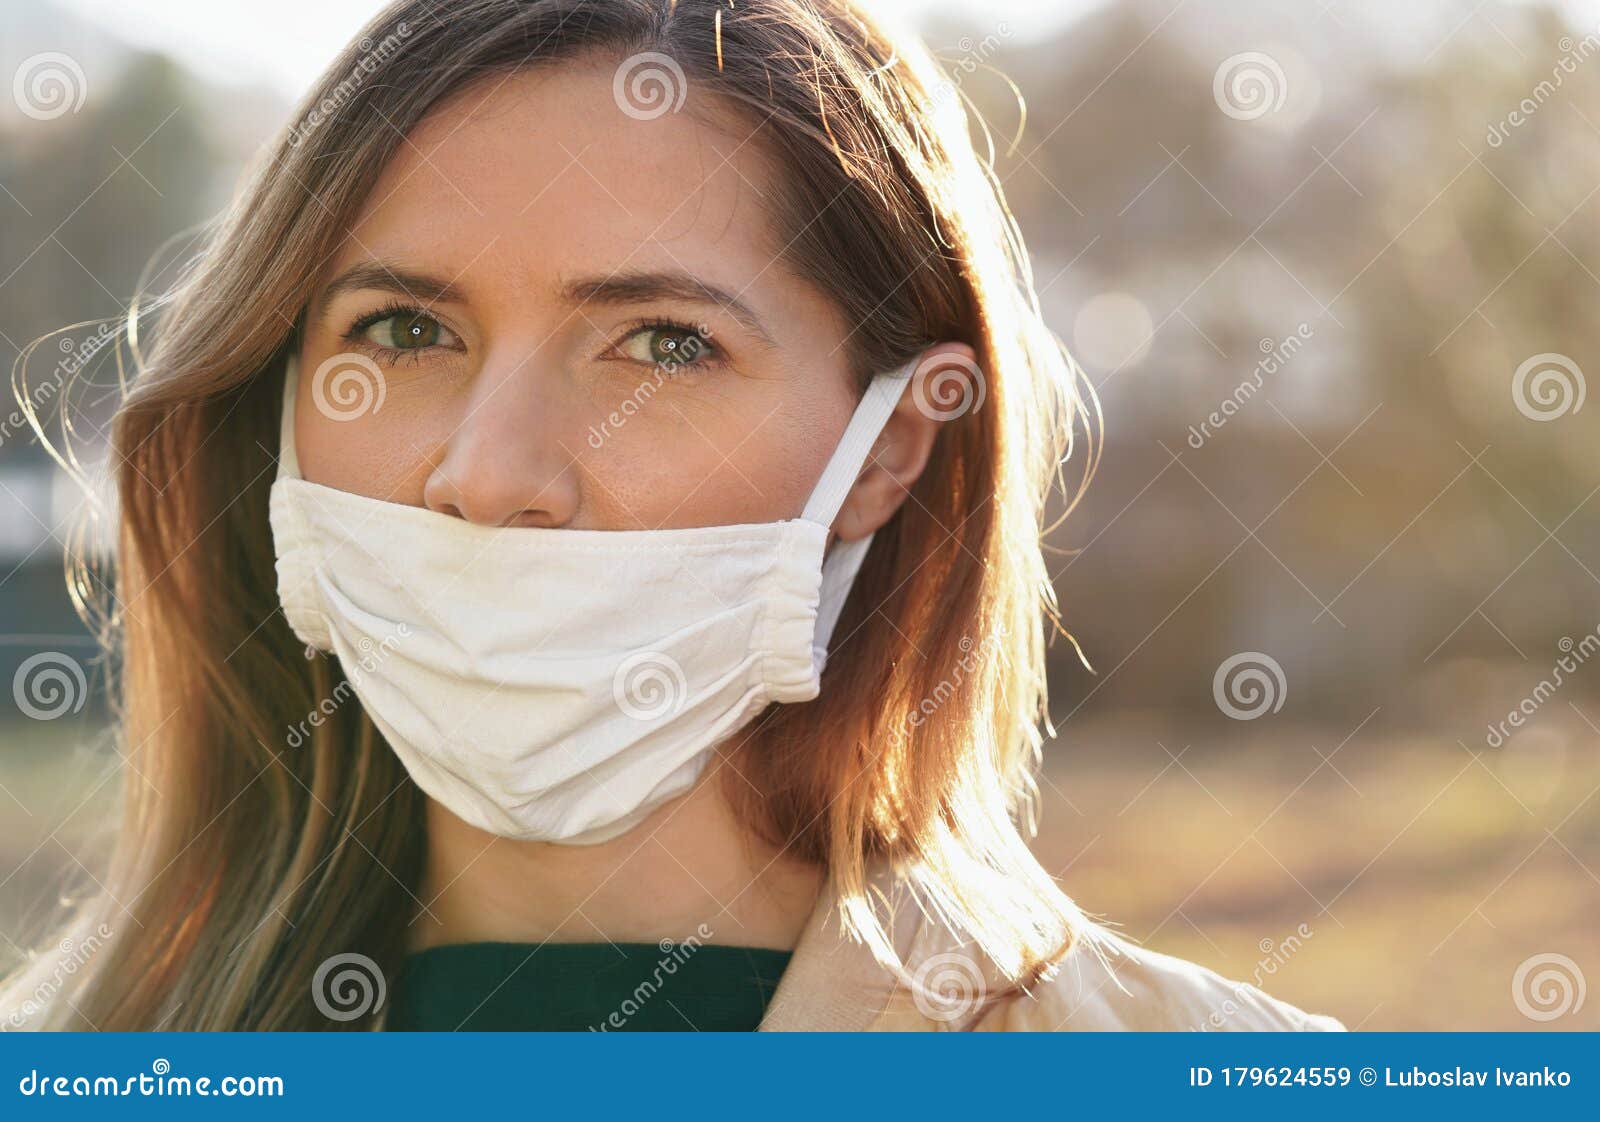 young woman wears home made white cotton mouth face mask, wrong way, incorrect wearing - masks should cover nose as well